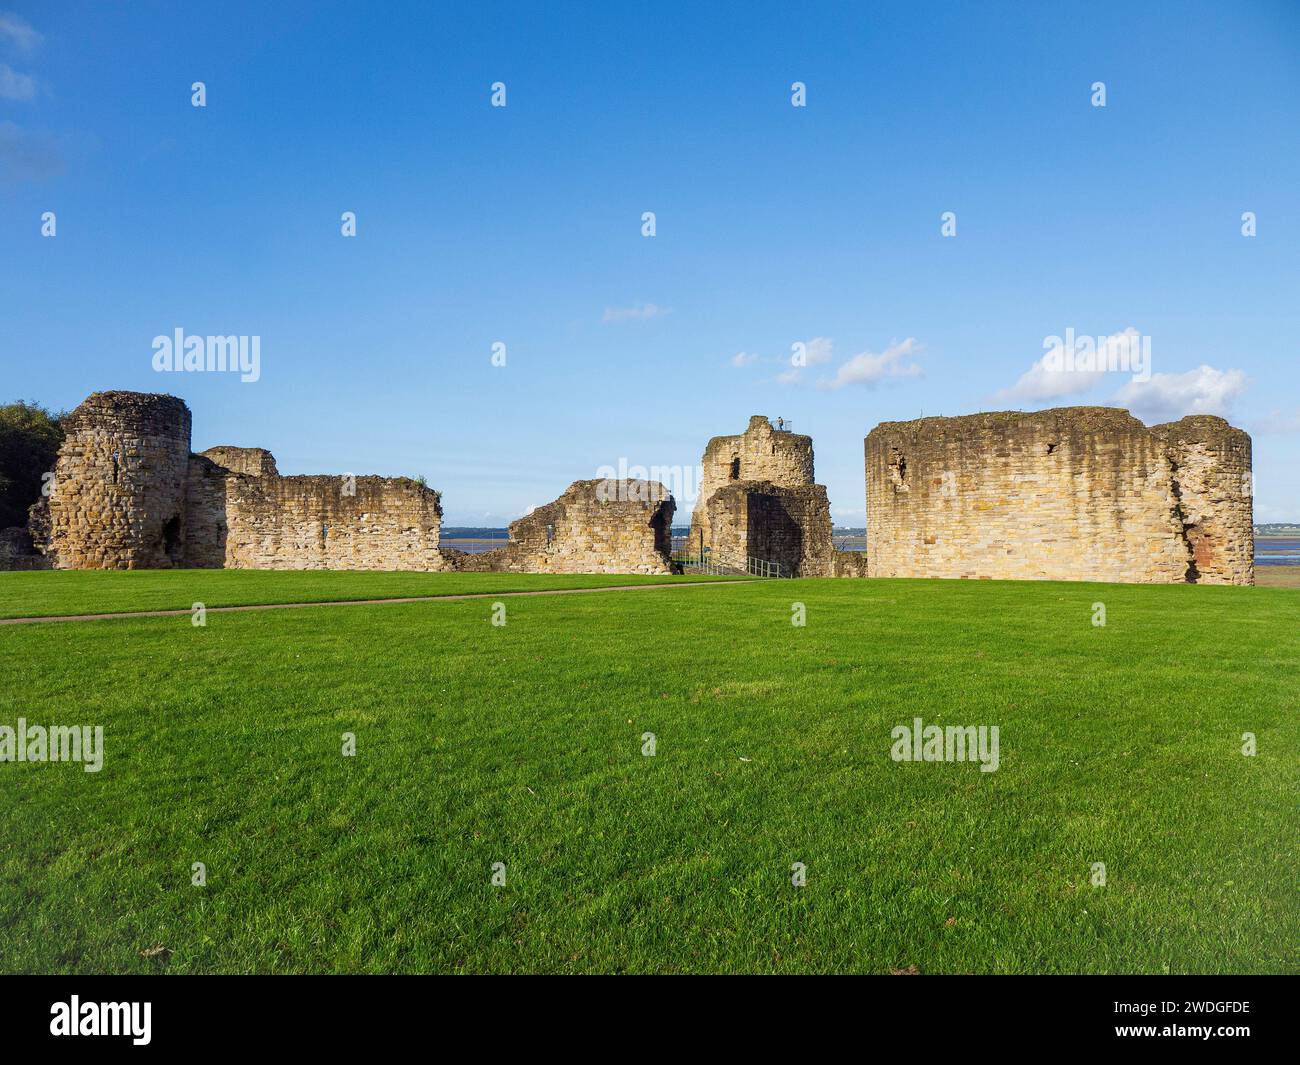 Front view of the ruined walls of Flint Castle, with it's unique outer donjon design, Flint, Flintshire, Wales, UK Stock Photo